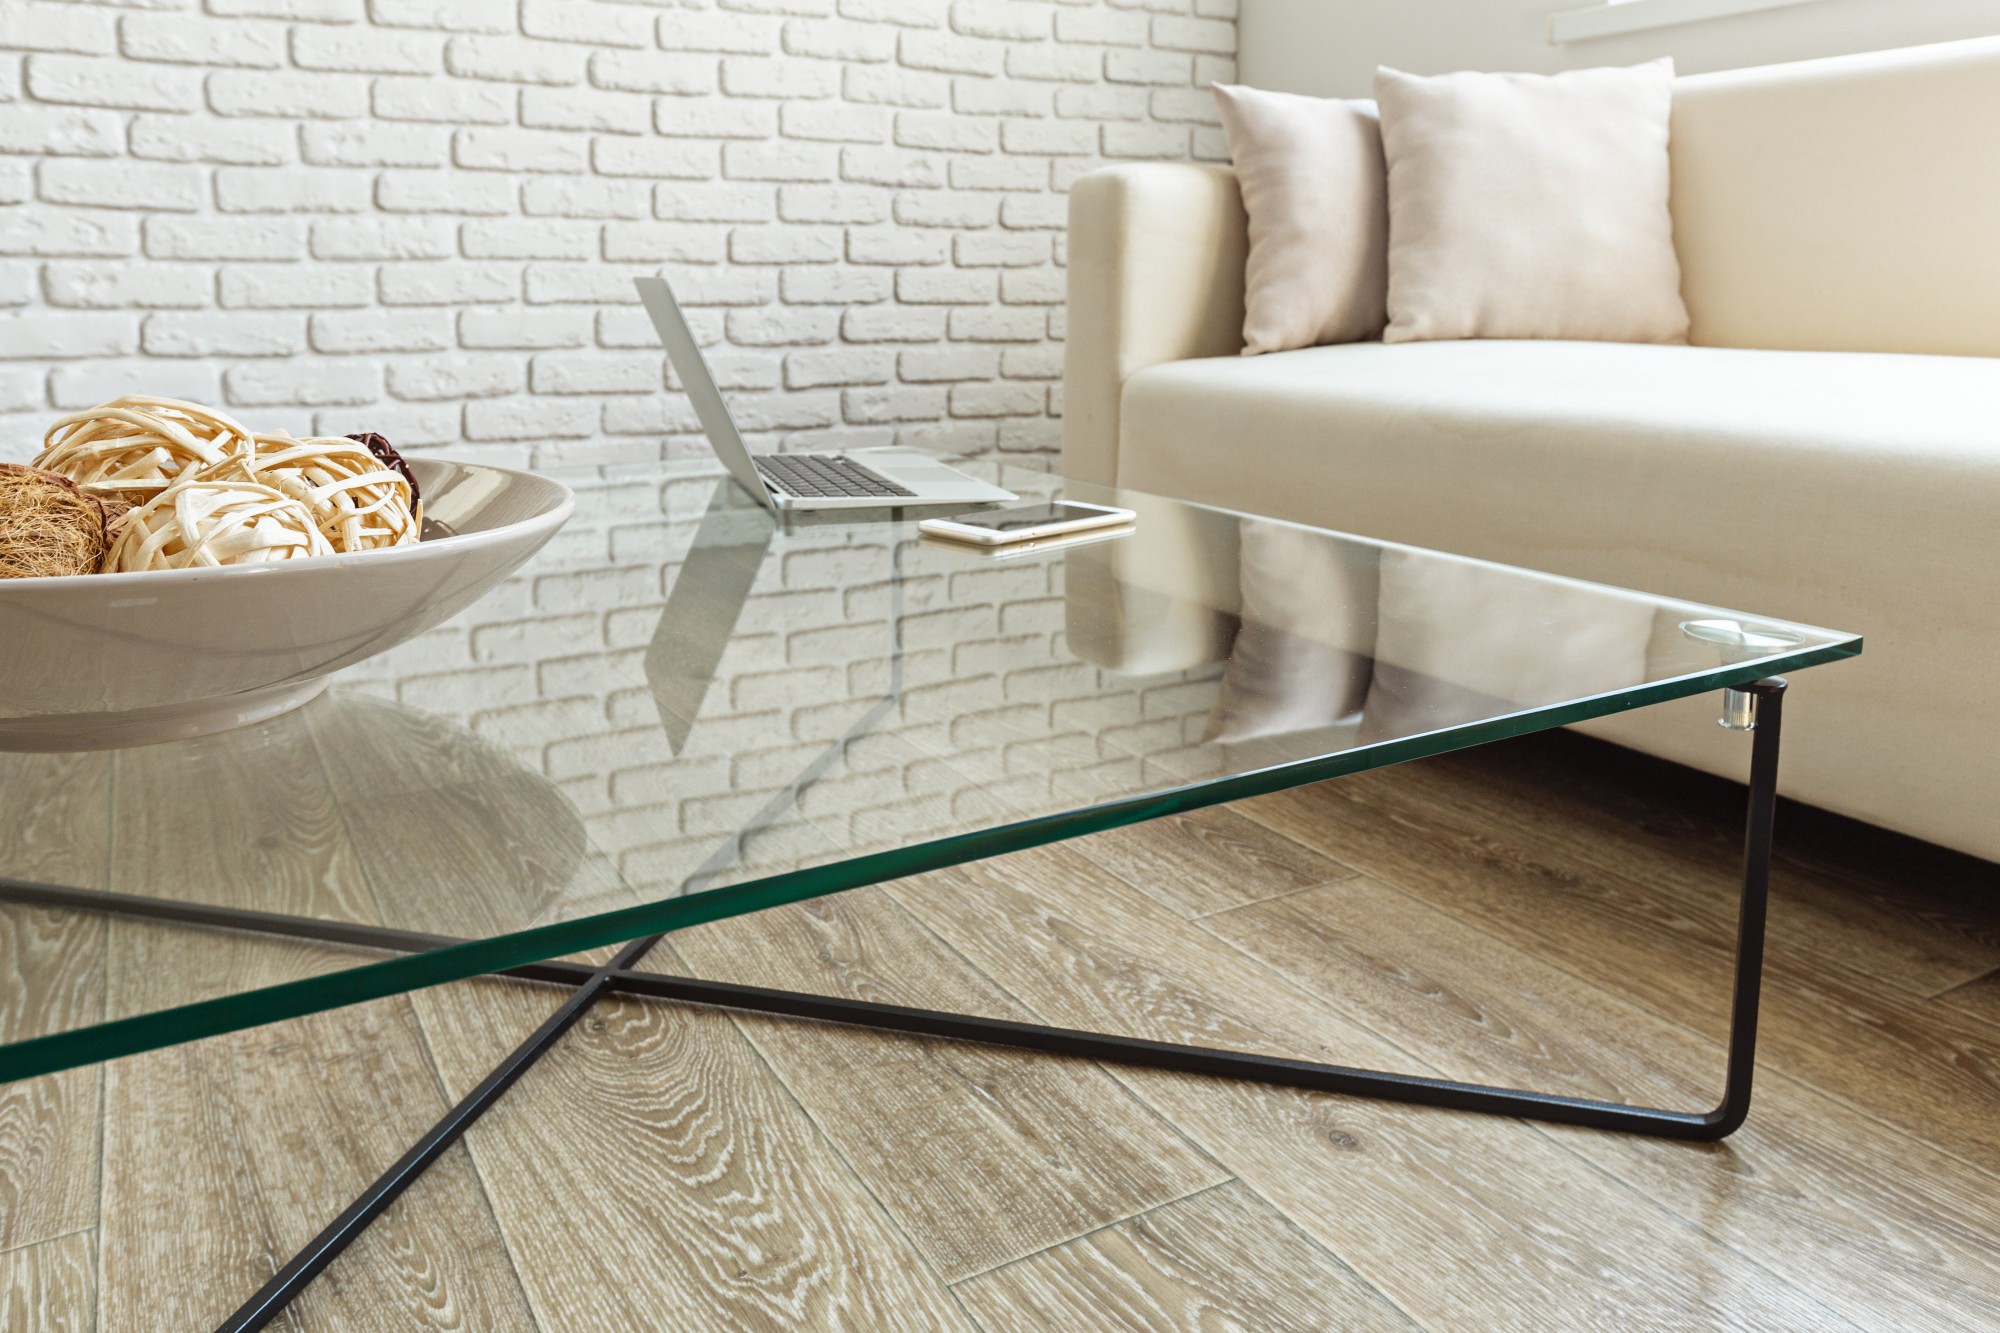 3 Types of Acrylic Tables for Your Home